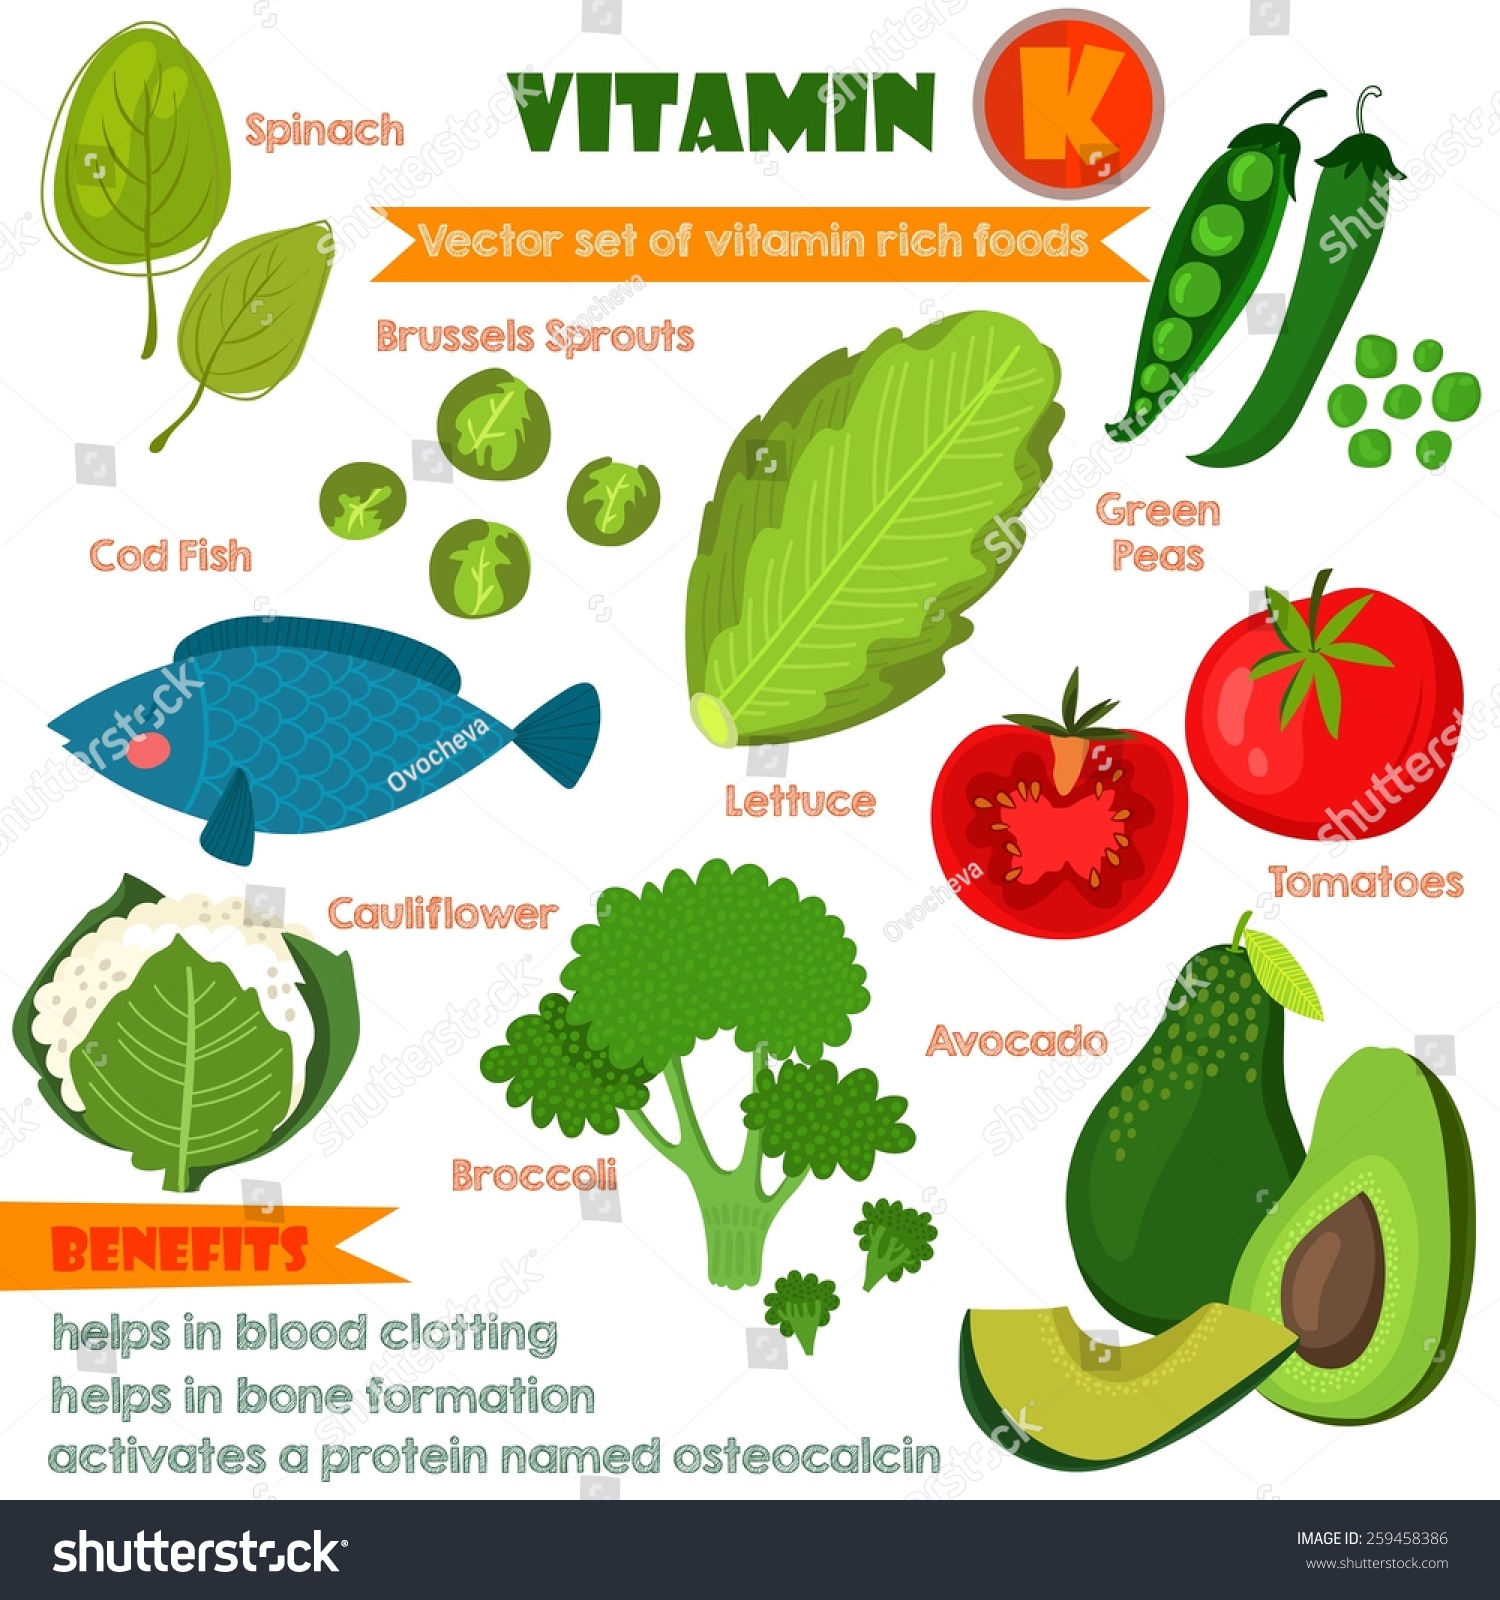 Which vegetables have Vitamin K?